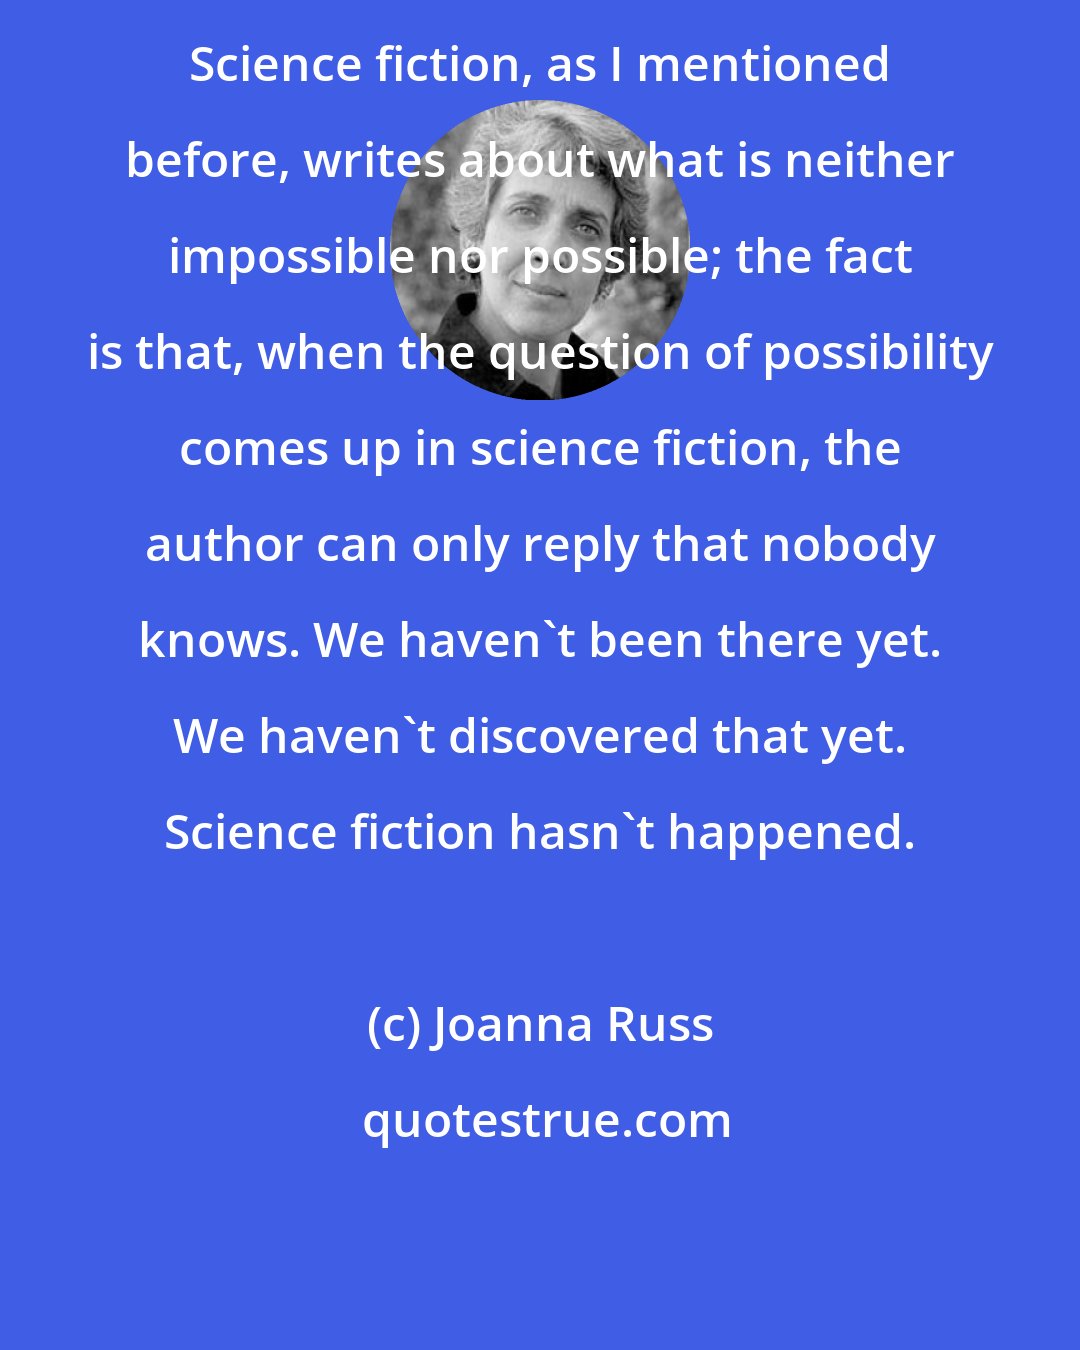 Joanna Russ: Science fiction, as I mentioned before, writes about what is neither impossible nor possible; the fact is that, when the question of possibility comes up in science fiction, the author can only reply that nobody knows. We haven't been there yet. We haven't discovered that yet. Science fiction hasn't happened.